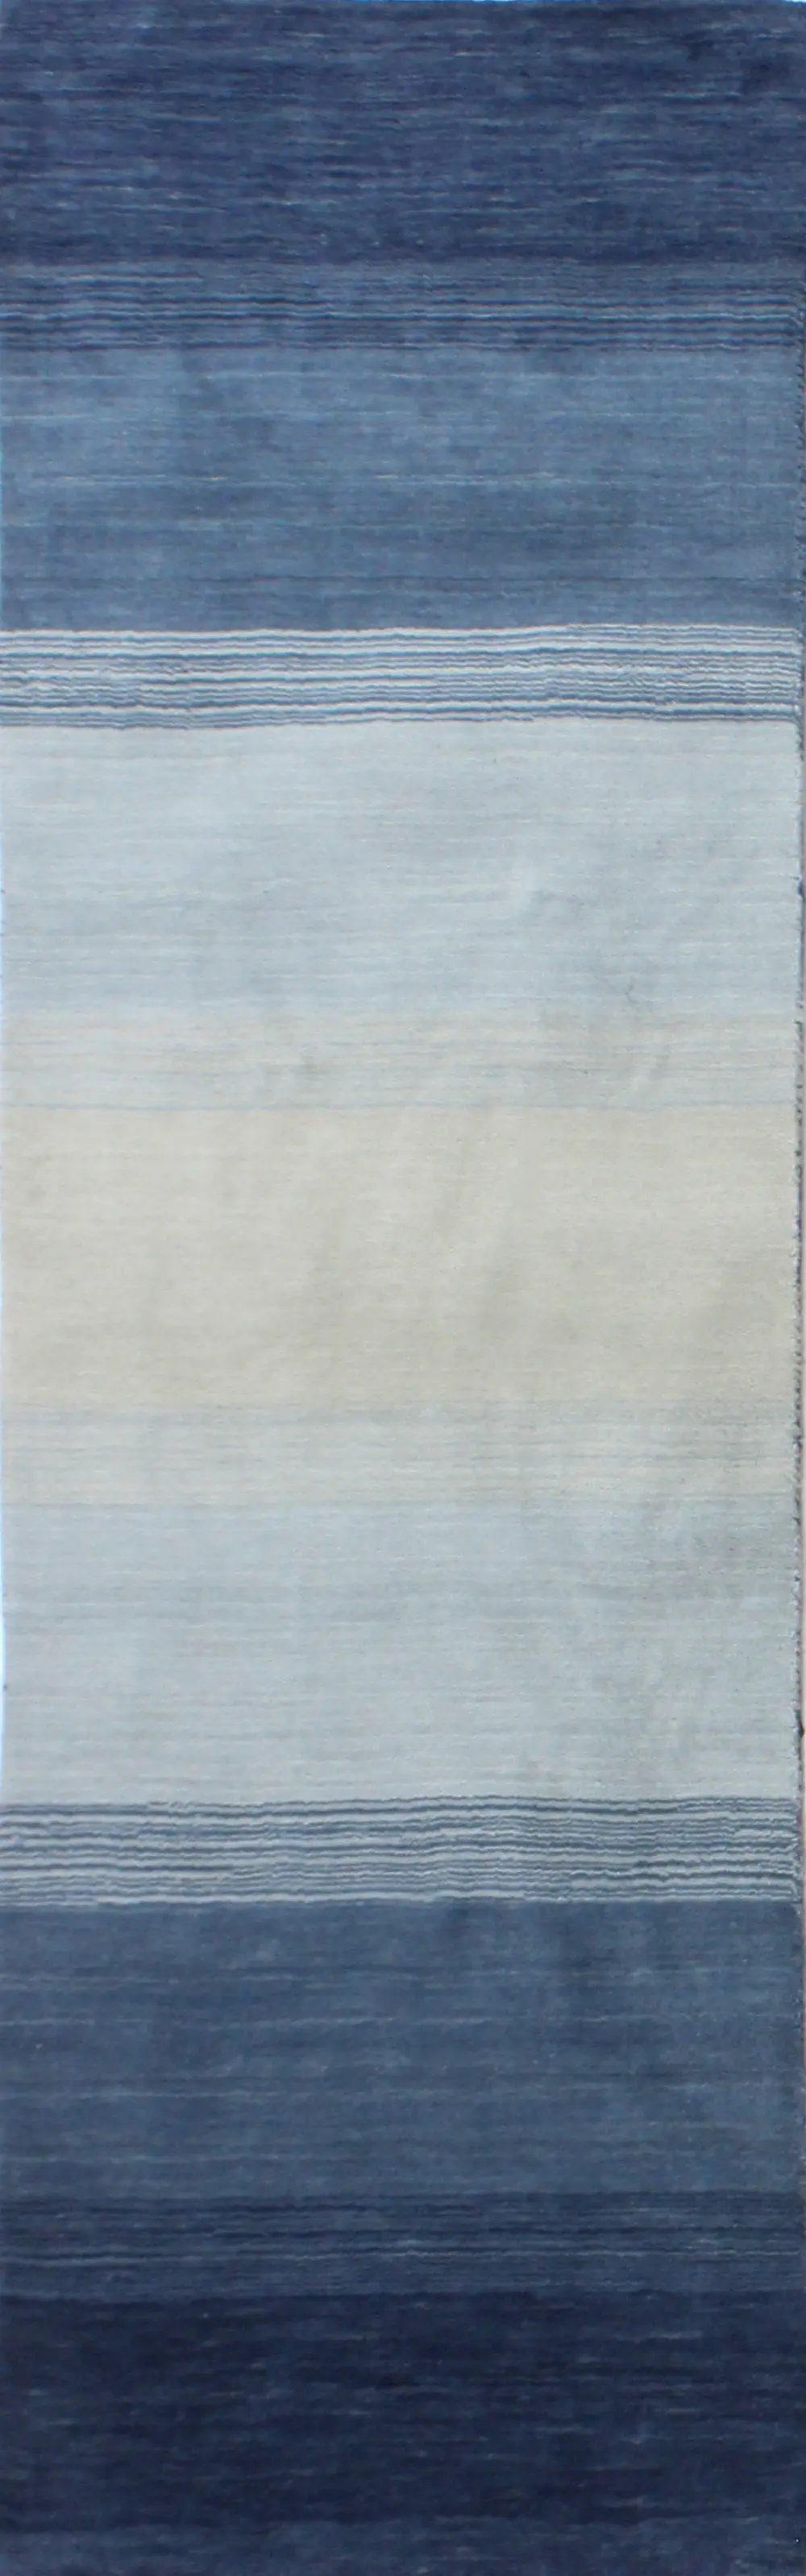 S176-BL-2.6X8-ALM95 Blue 8 Foot Runner Rug - Contempo-1